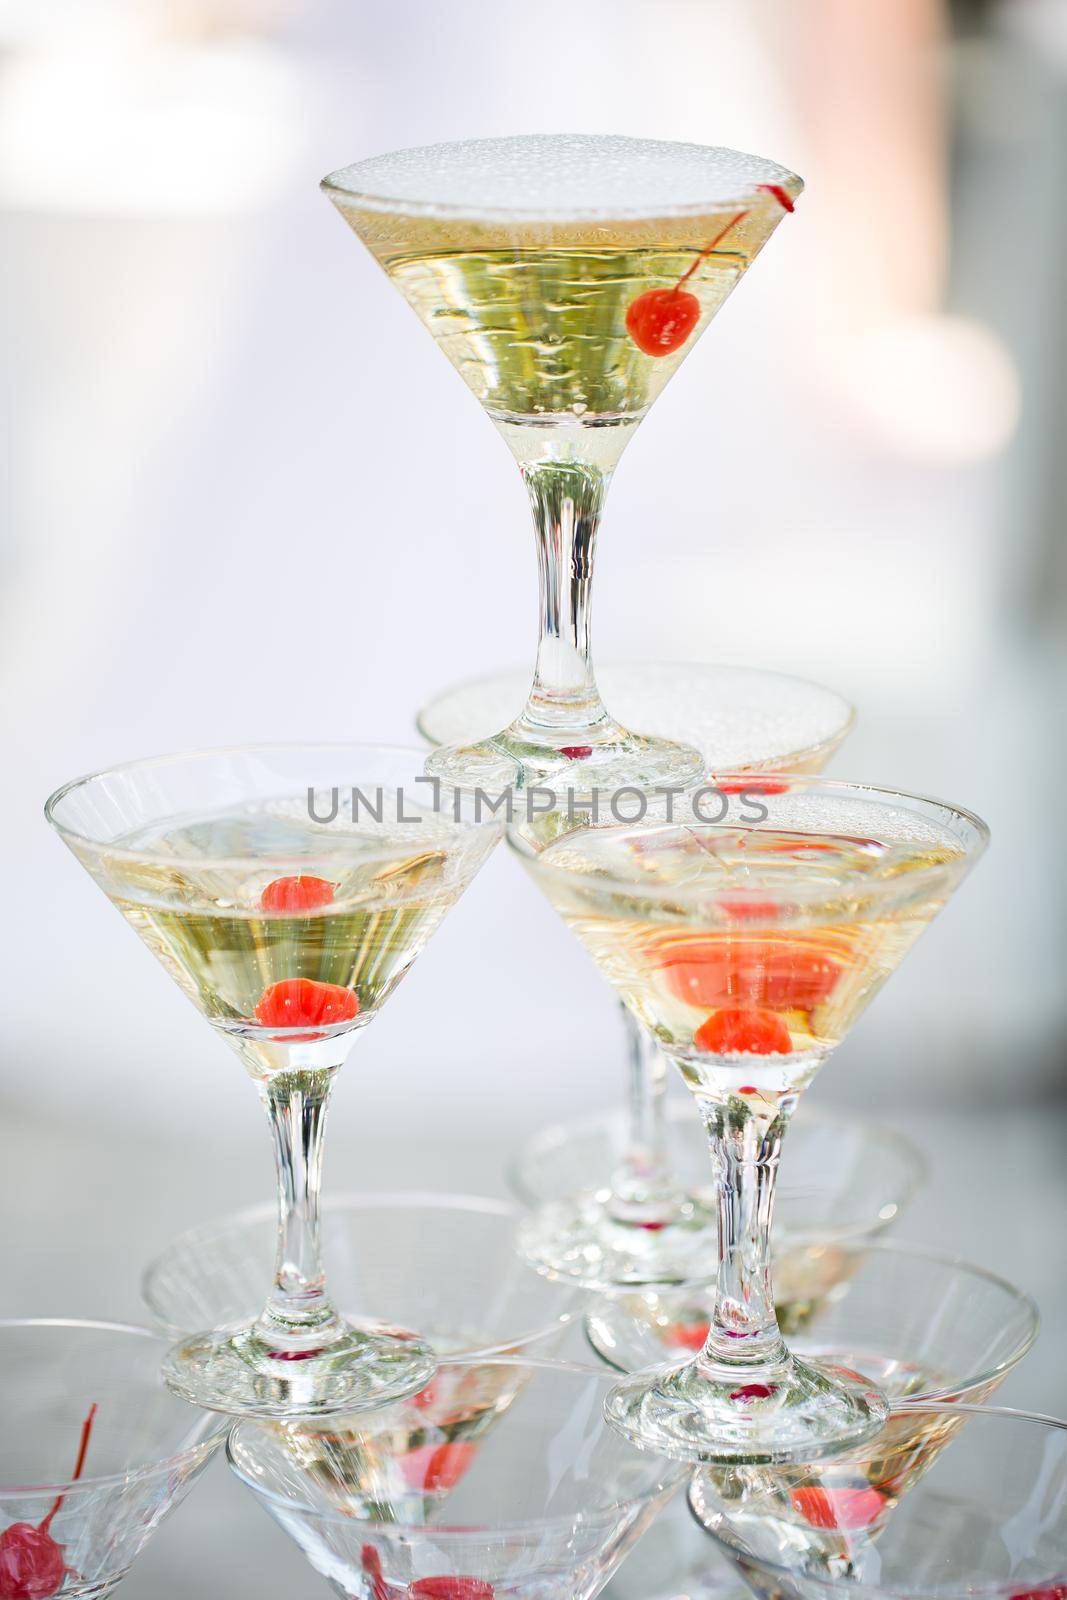 Pyramid of glasses, cherry in the glass